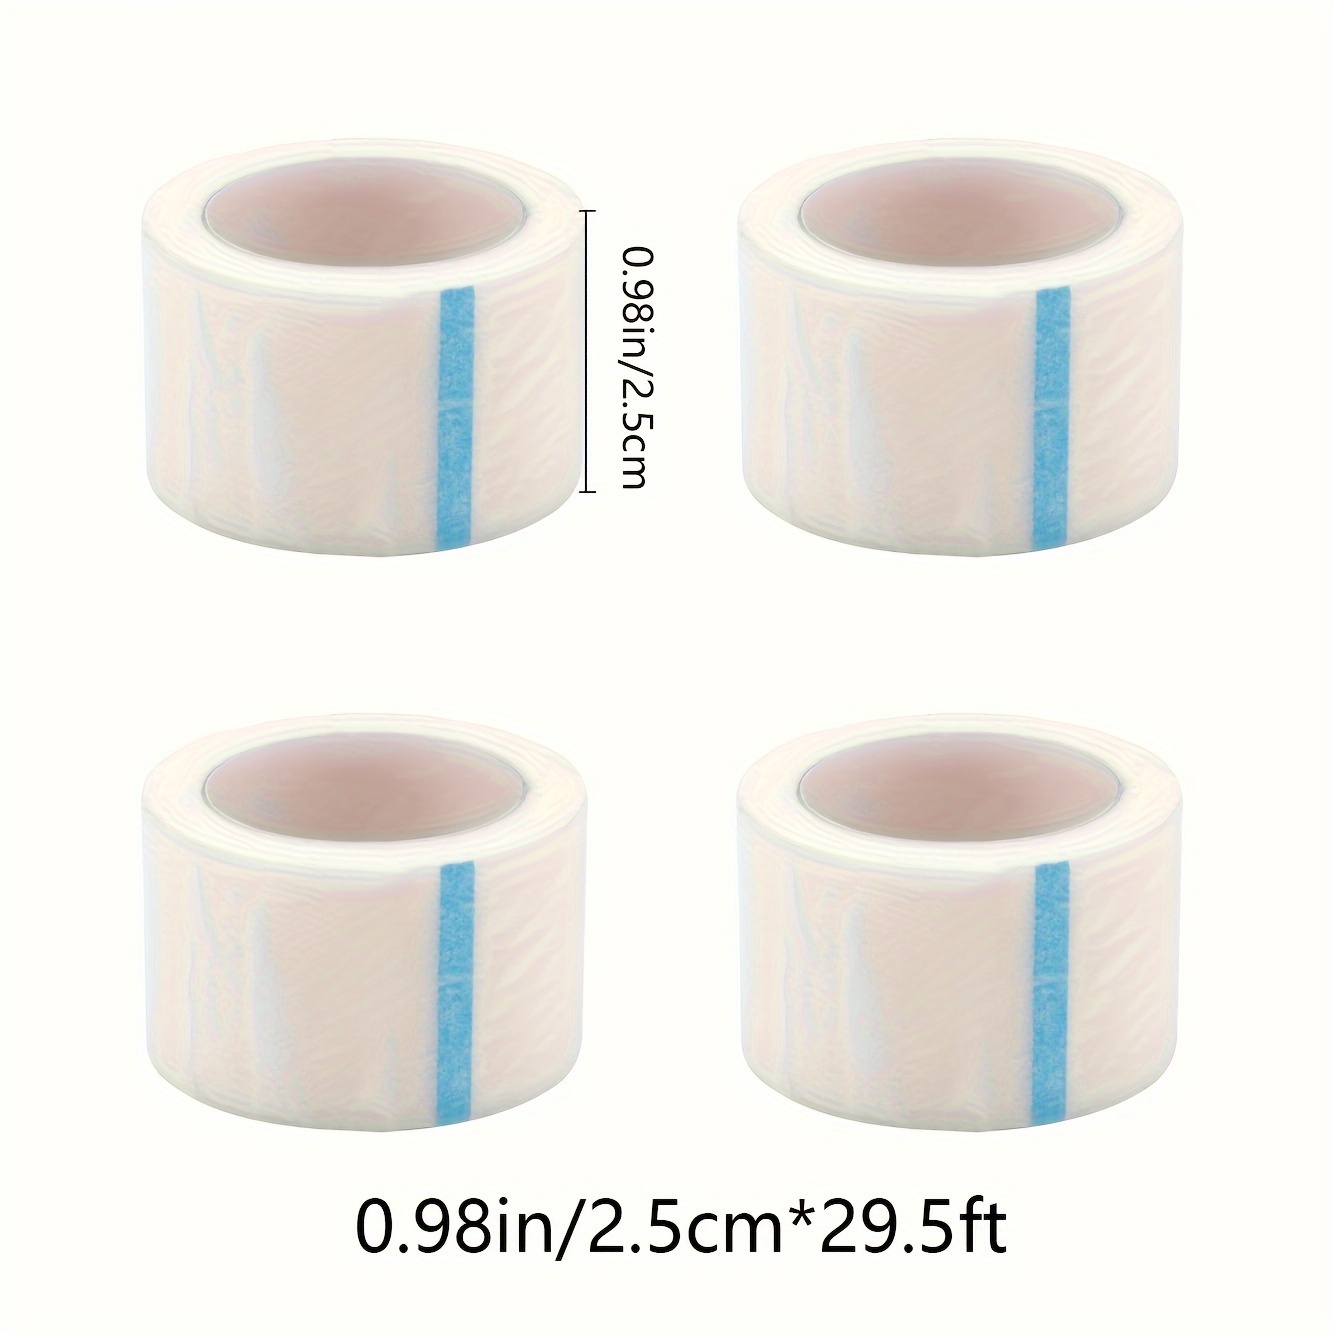 micropore paper tape medical surgical breathable wound care